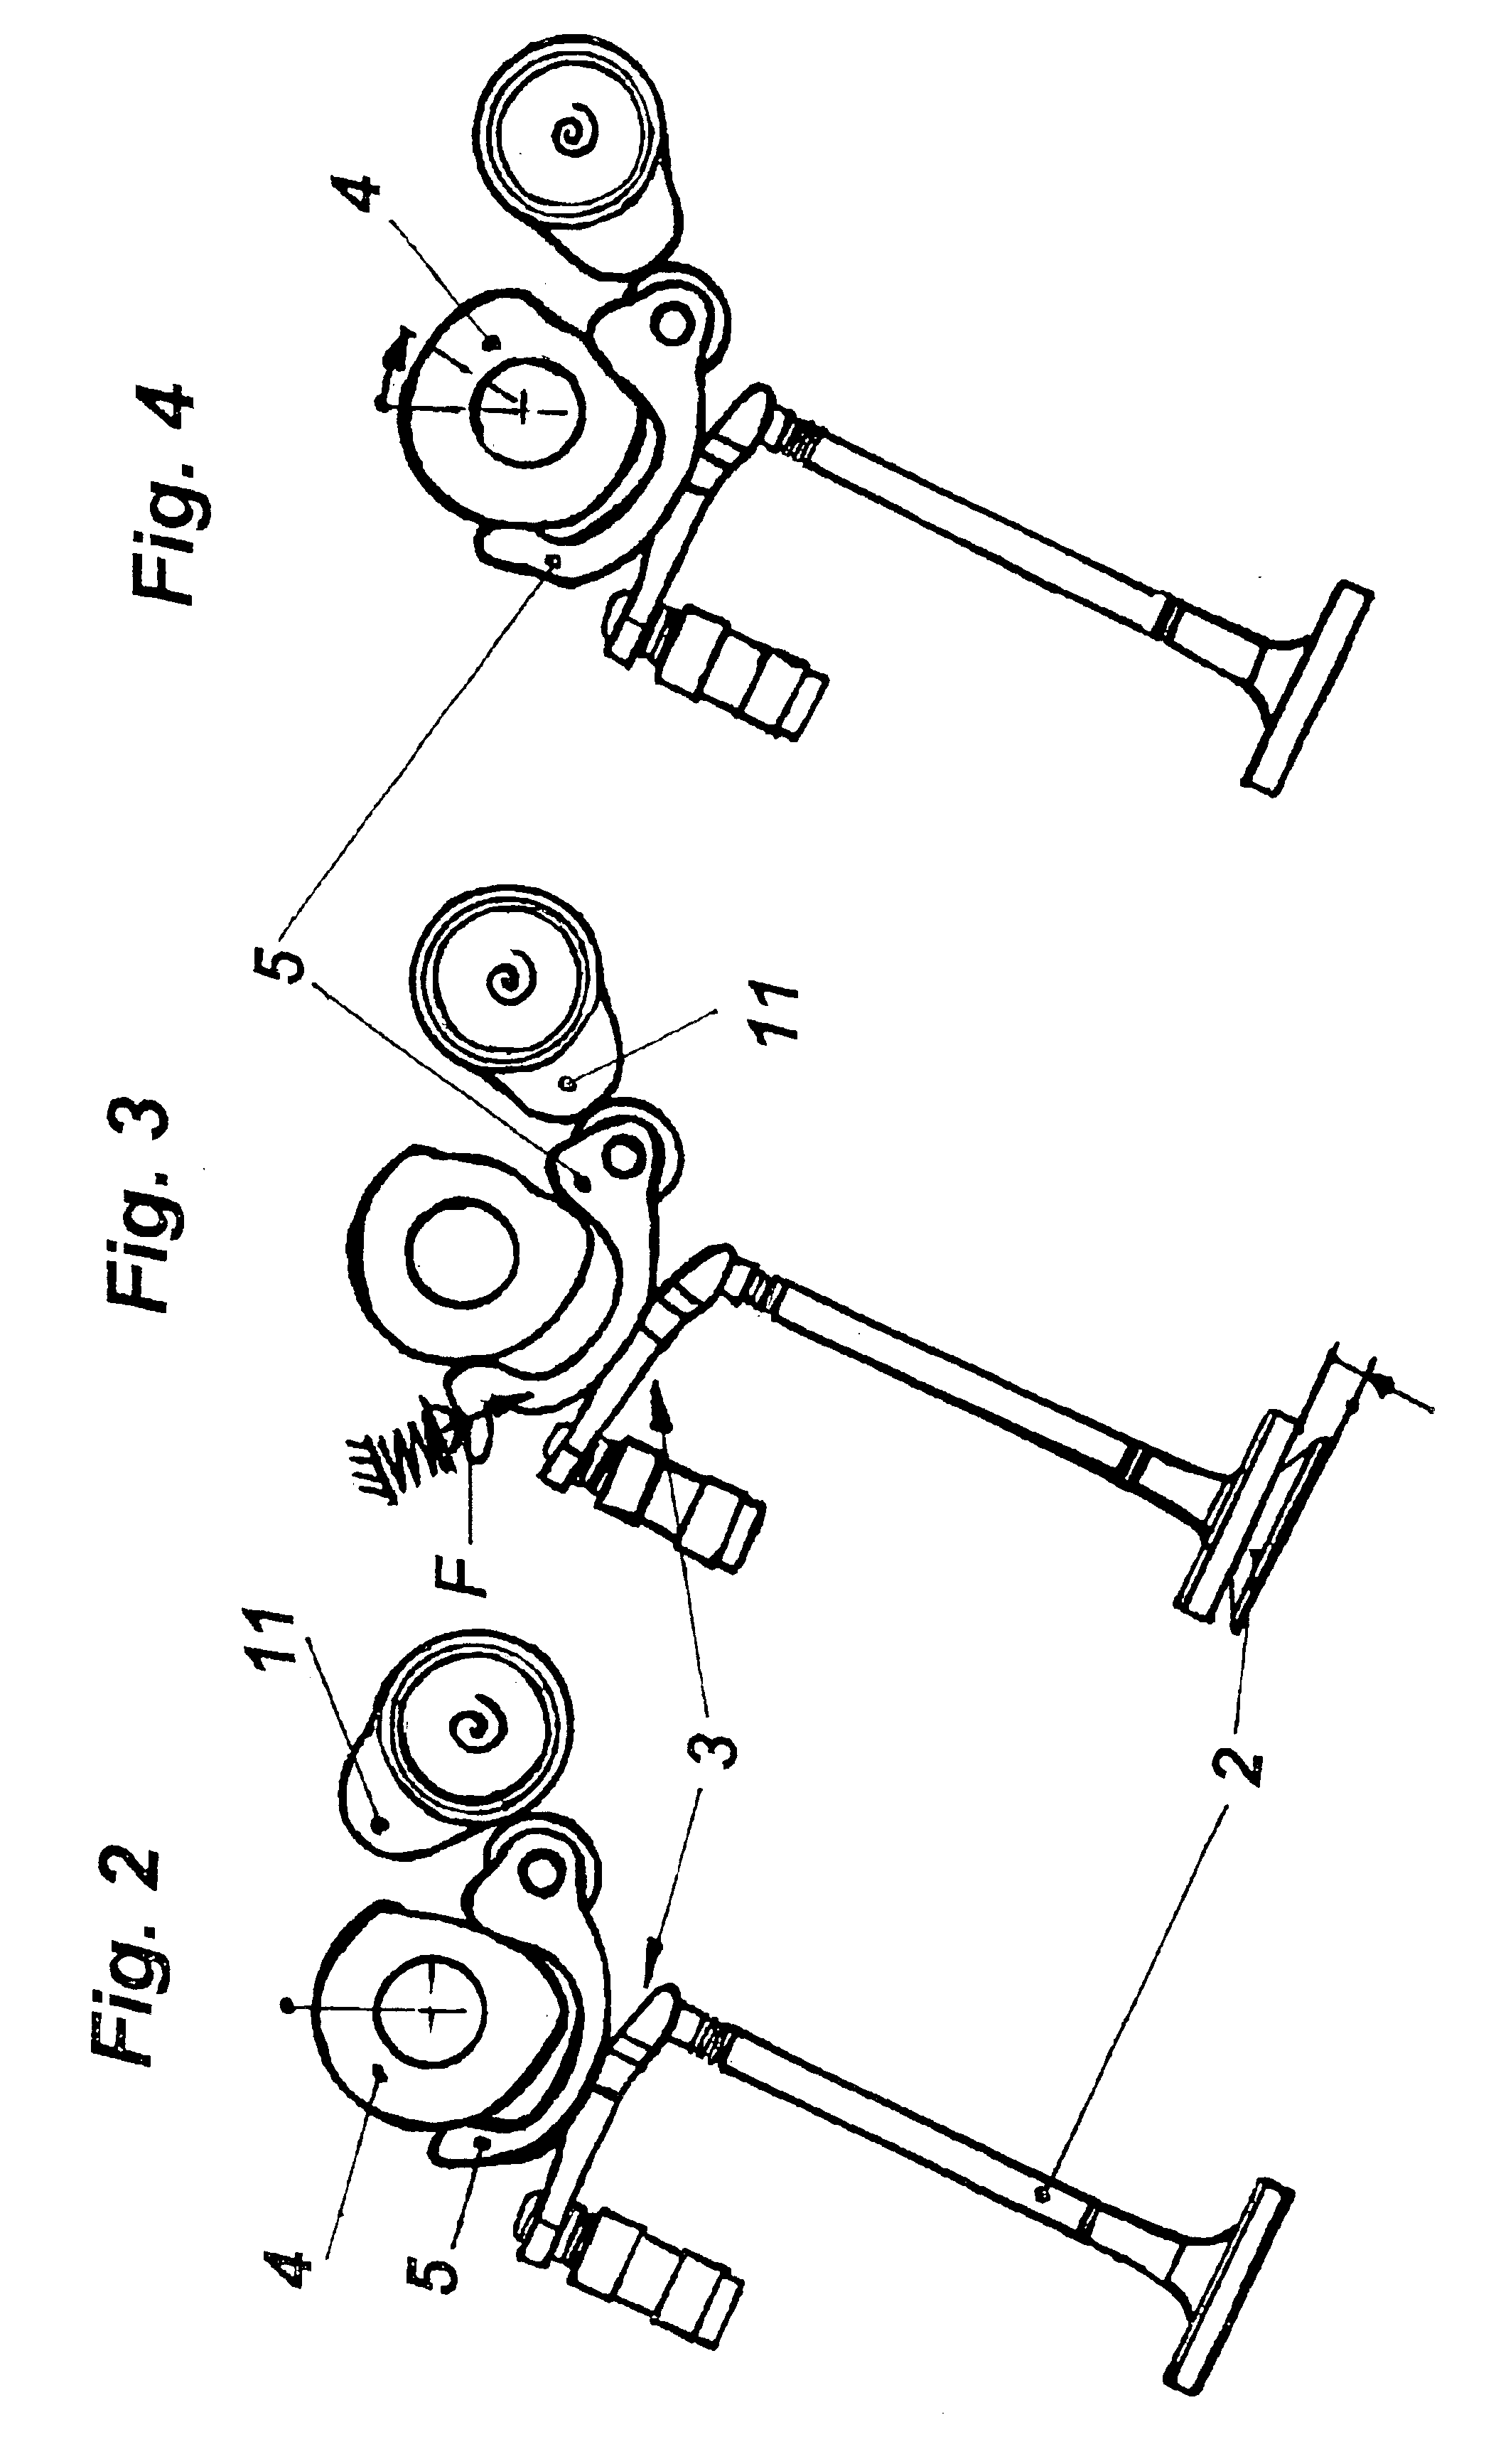 System for variably actuating valves in internal combustion engines